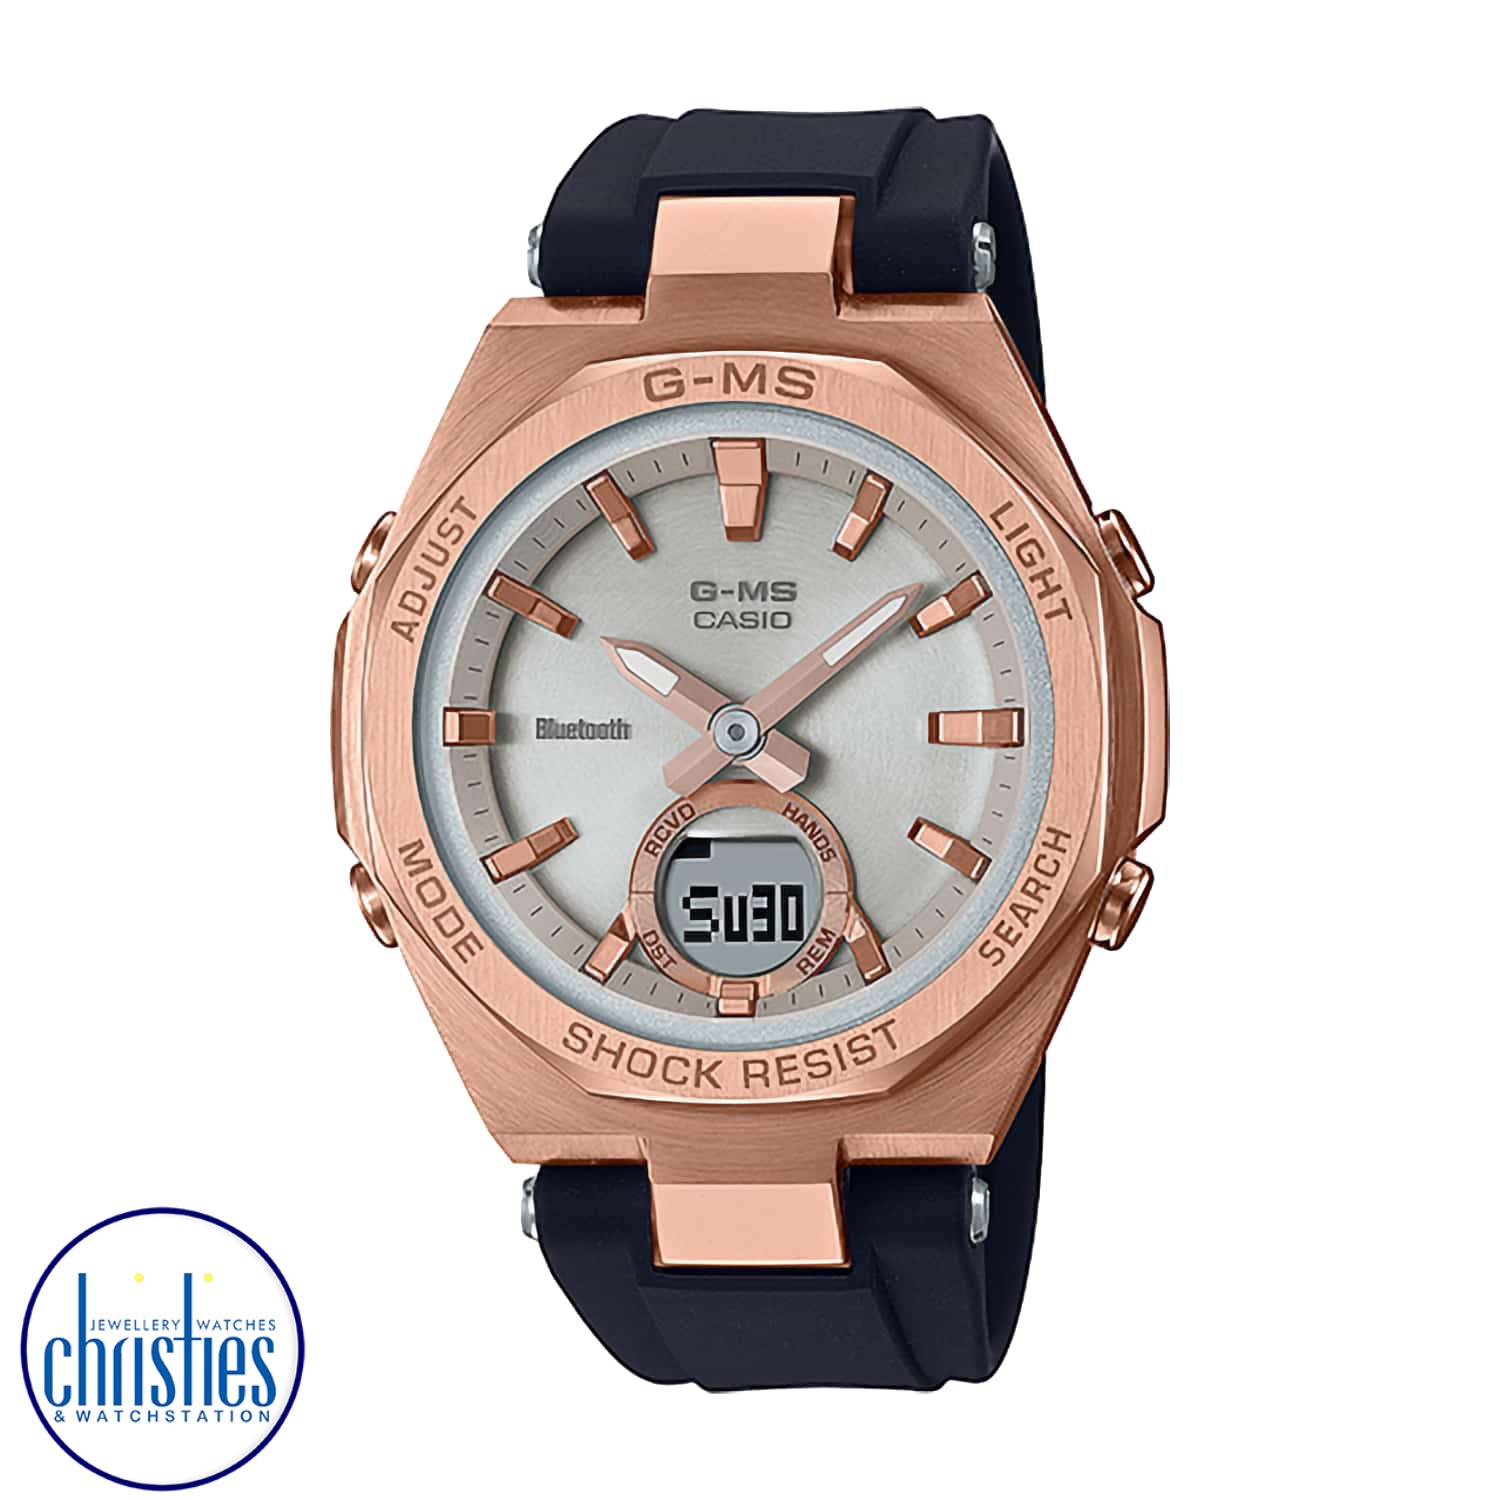 MSGB100G-1A BABY-G G-MS Bluetooth Watch. Have it both ways! The practical luxury and G-SHOCK strength of the G-MS metal design meets the intuitive connectivity of the MSG-B100 line for even more convenience and smartphone-enhanced functionality. Just pair